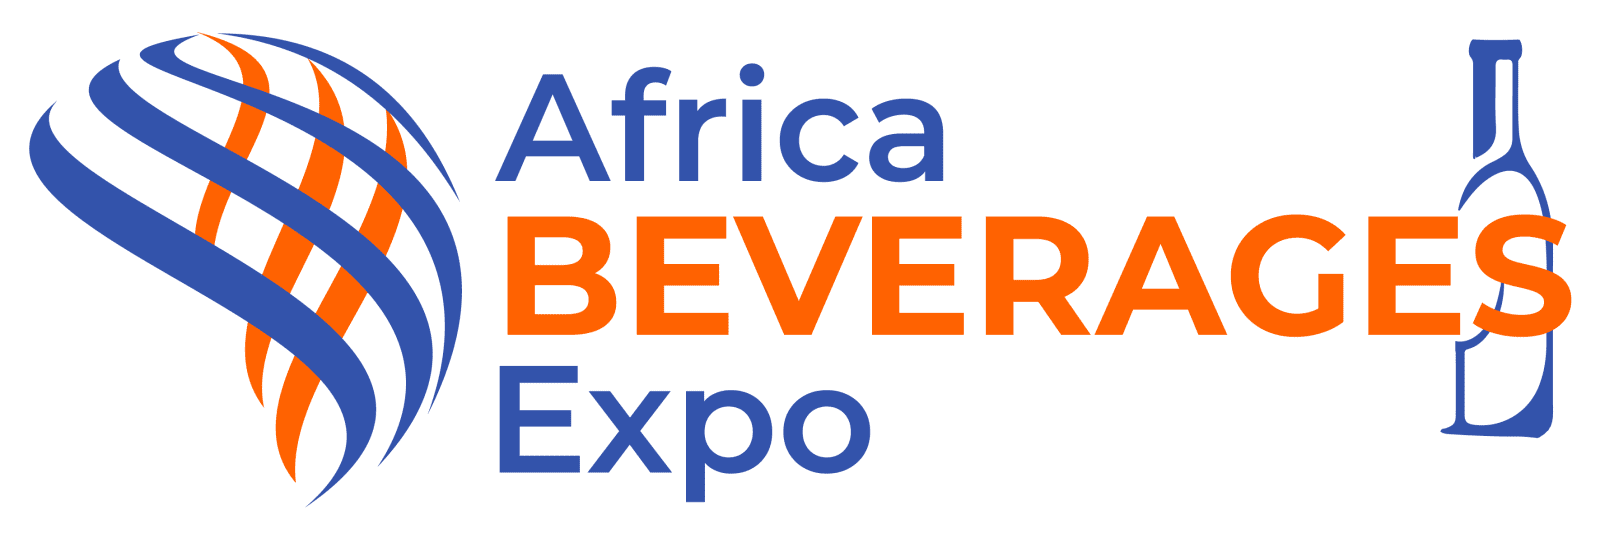 Africa Beverages Expo - Africa's Premier Beverages Industry Events